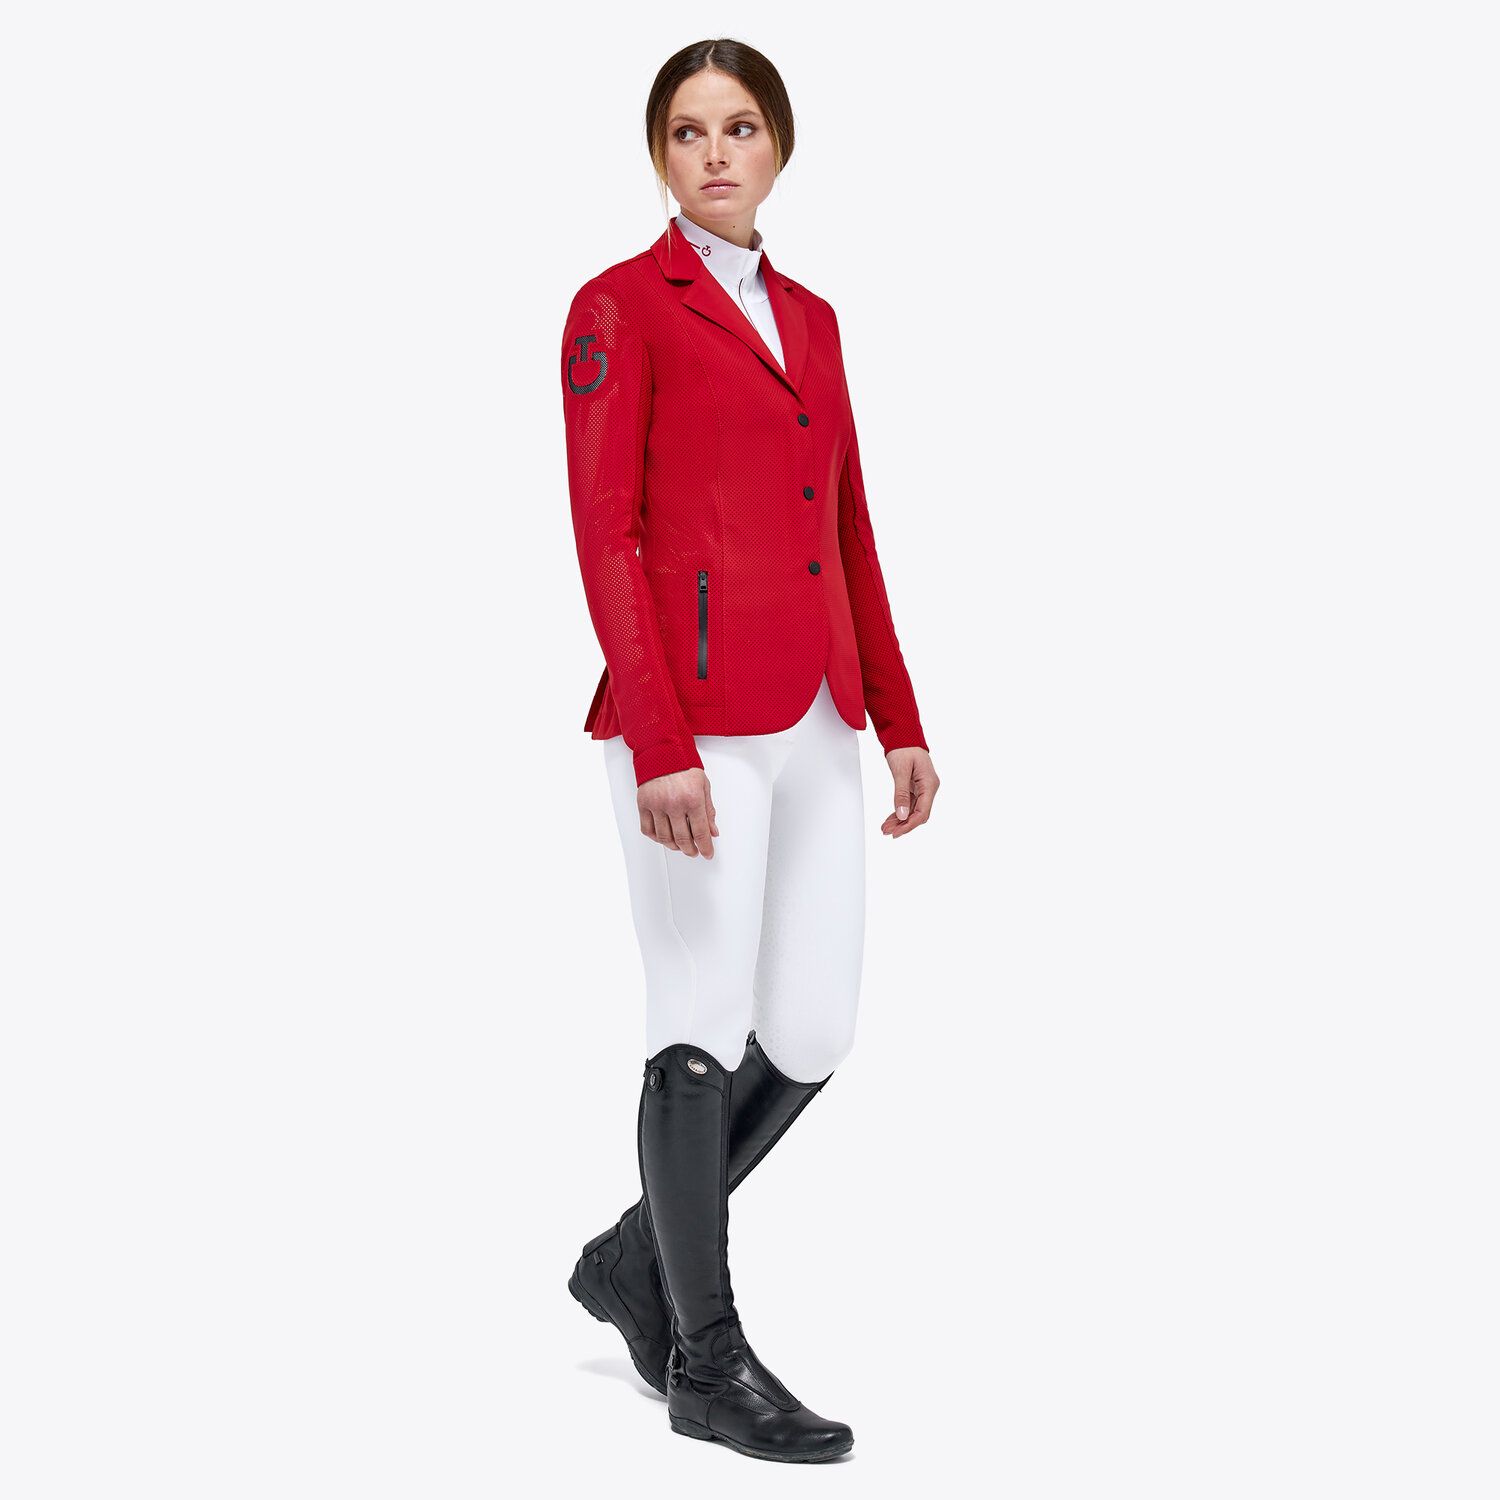 Cavalleria Toscana Women's competition riding jacket embroidery RED-2